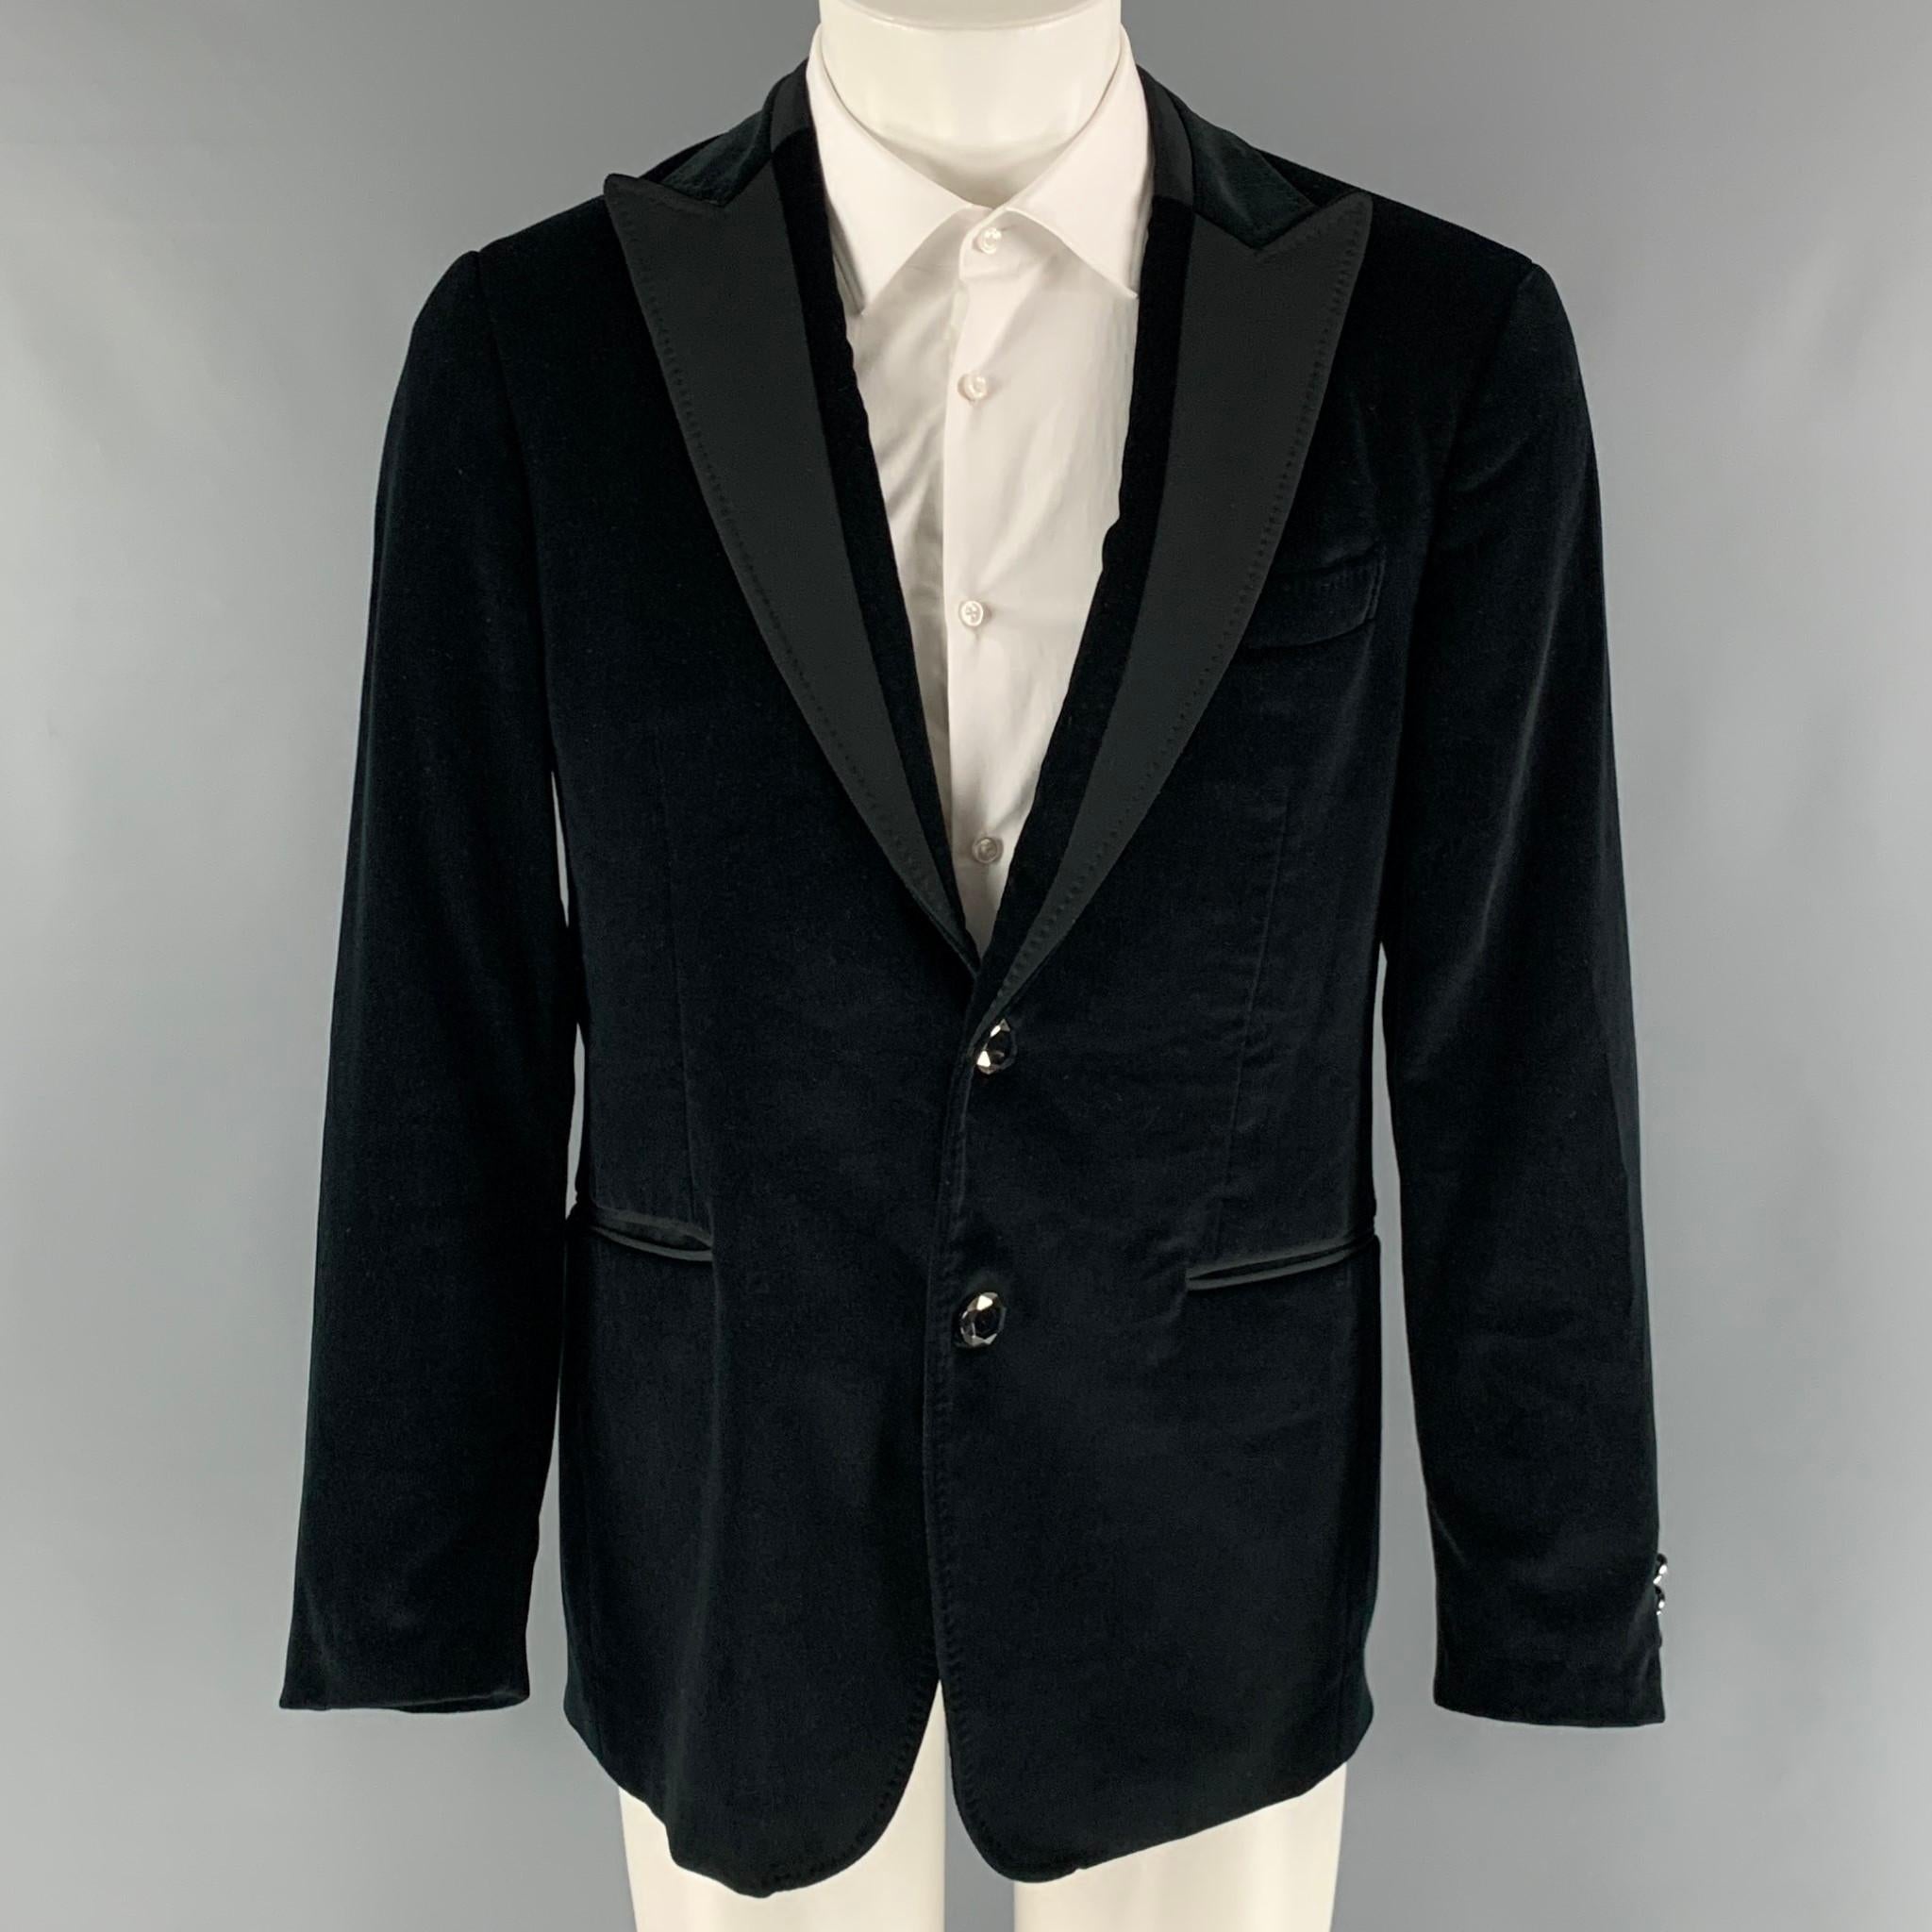 ETRO sport coat comes in black cotton velvet material featuring a peak lapel, single breasted, two button front, and a single back vent. Made in Italy.

Excellent Pre-Owned Condition.
Marked: IT 50

Measurements:

Shoulder: 17.5 in.
Chest: 43